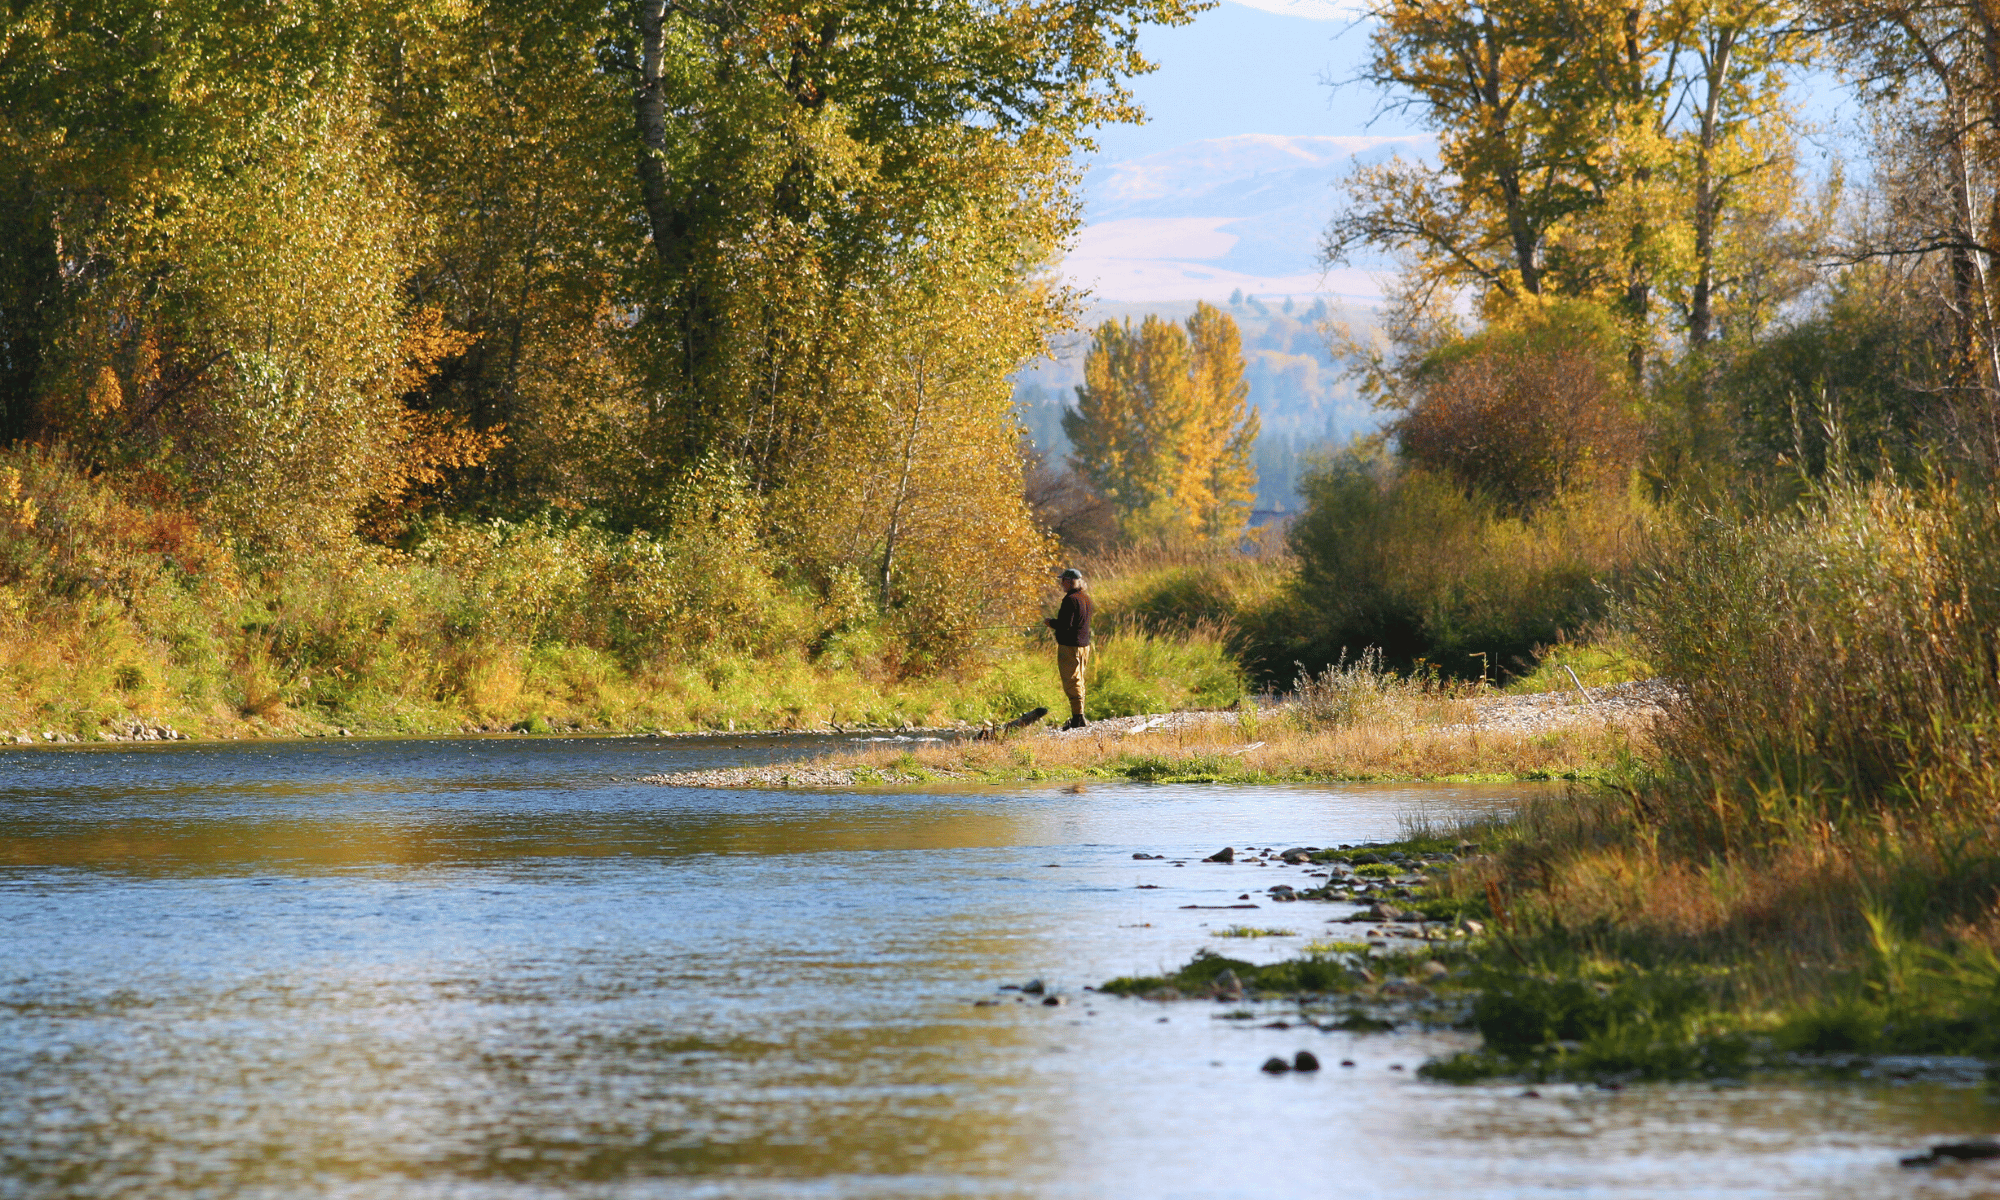 fly fishing on the Bitterroot River in Montana